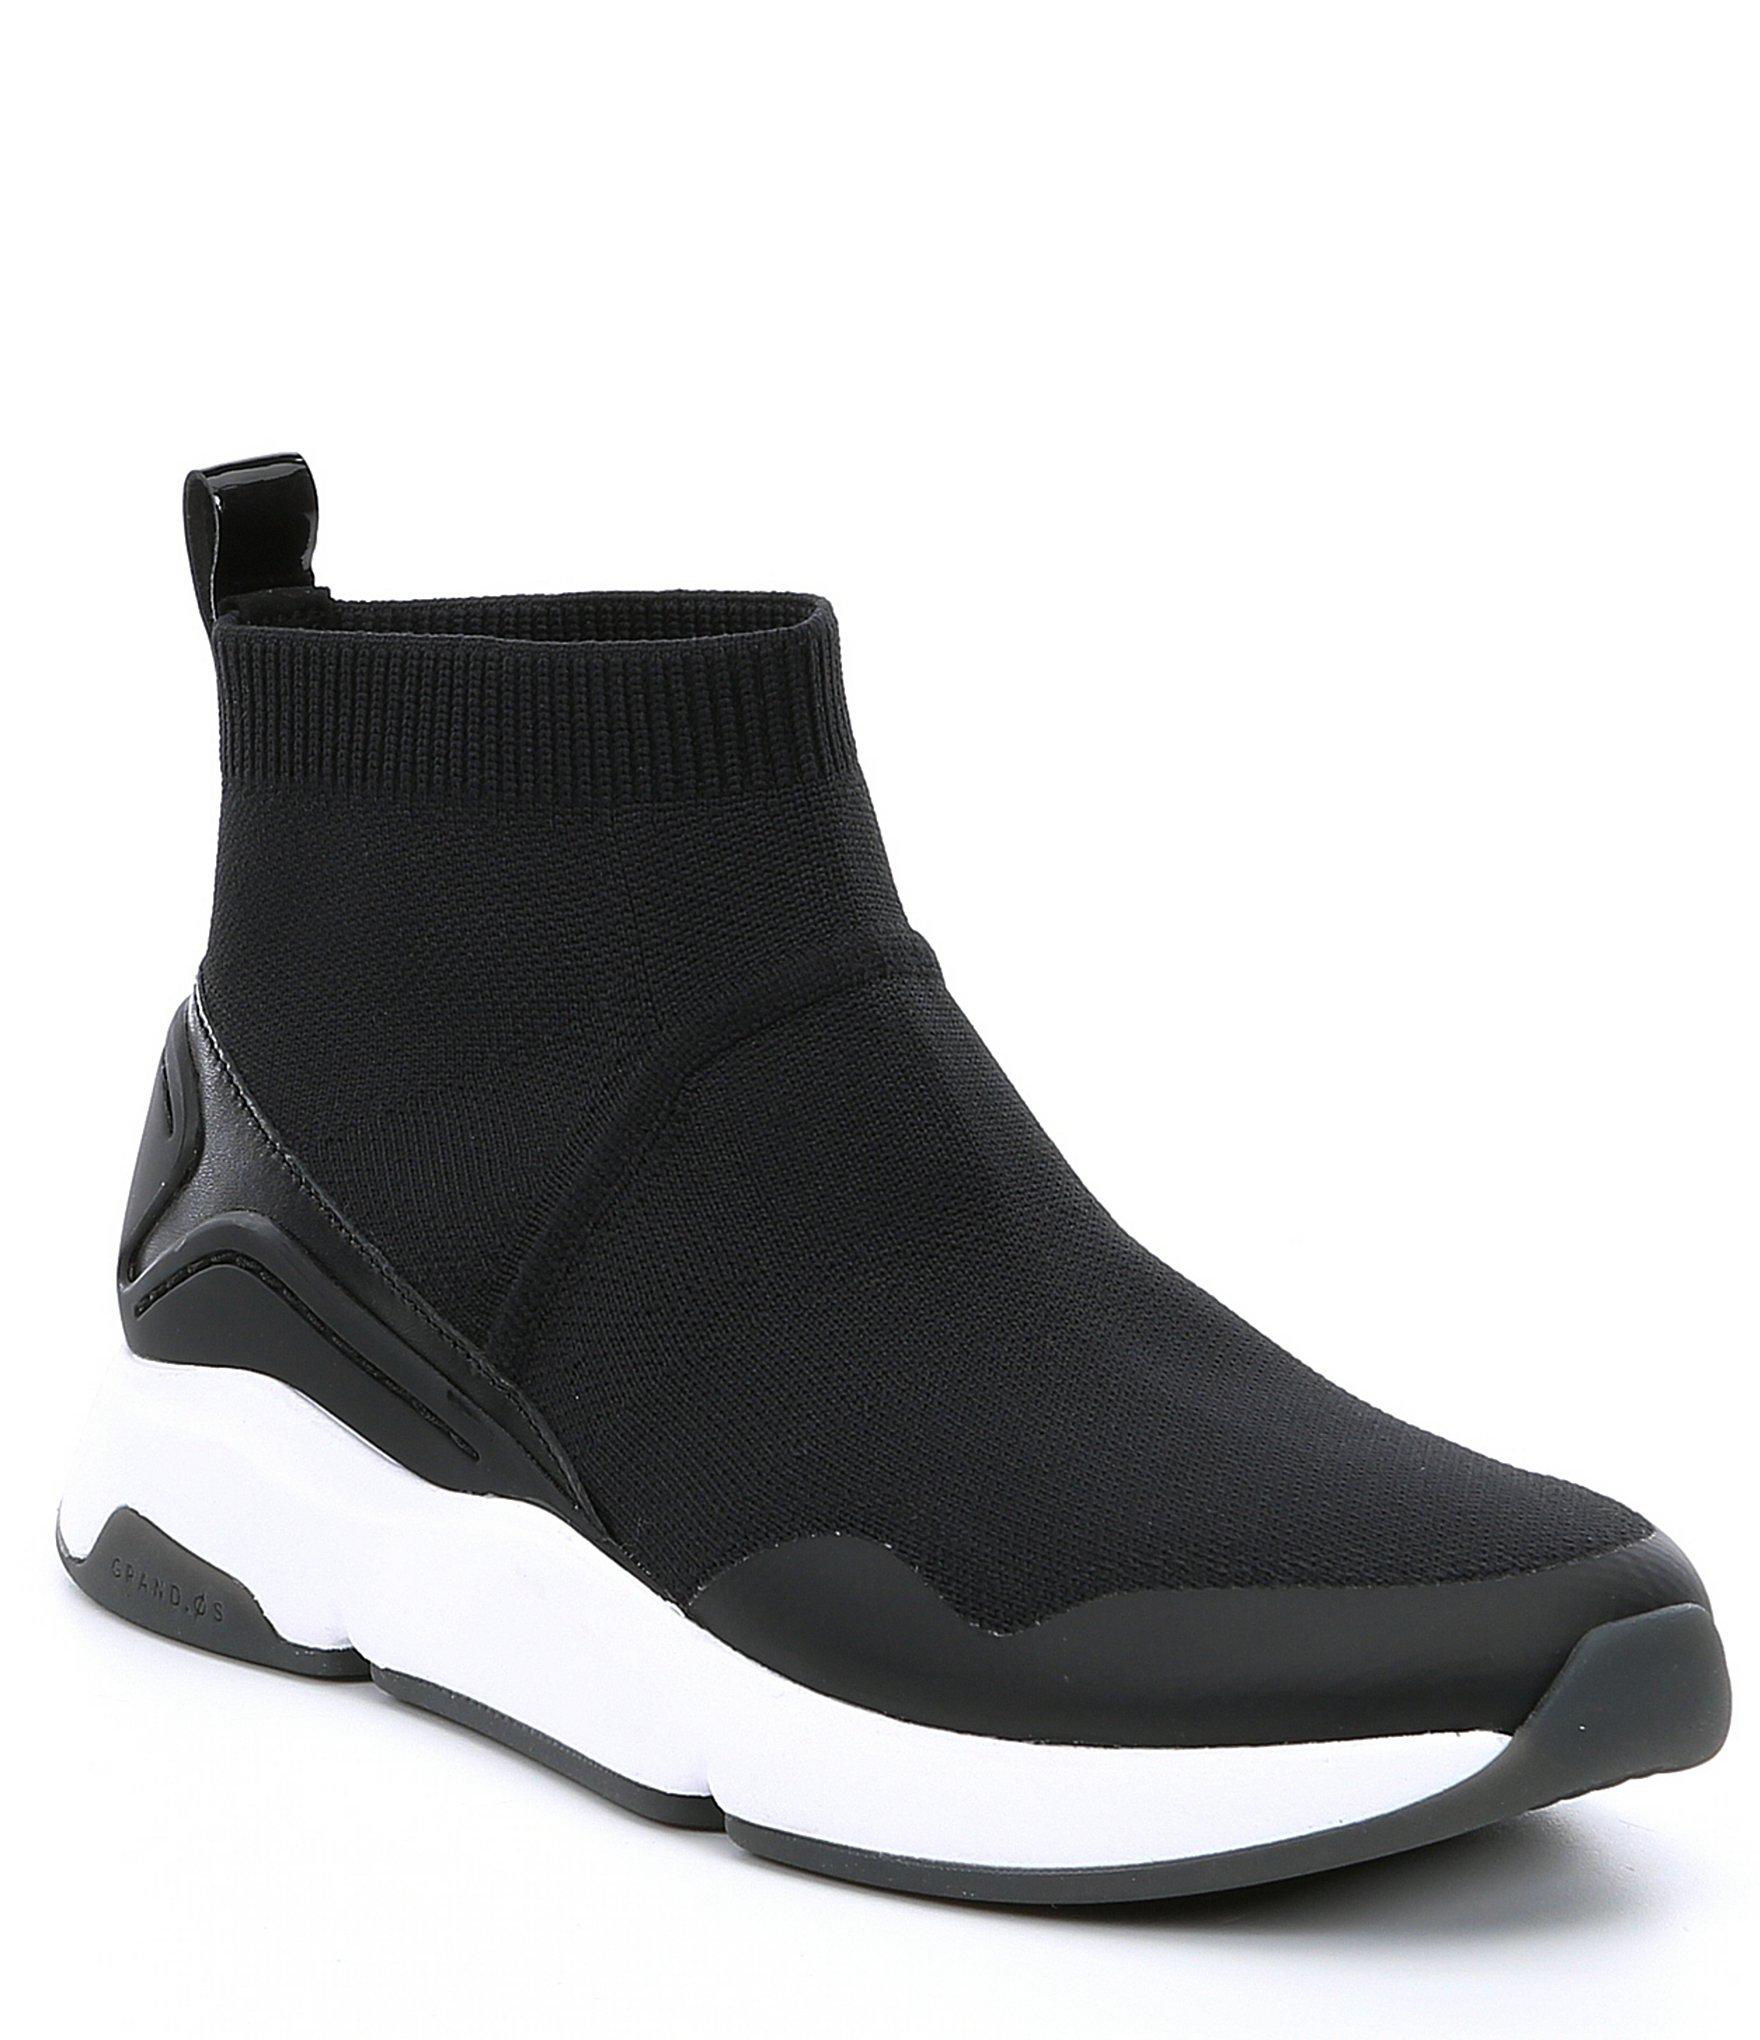 Lyst - Cole Haan Zerogrand All-day Trainer Slip-on With Stitchlite in Black